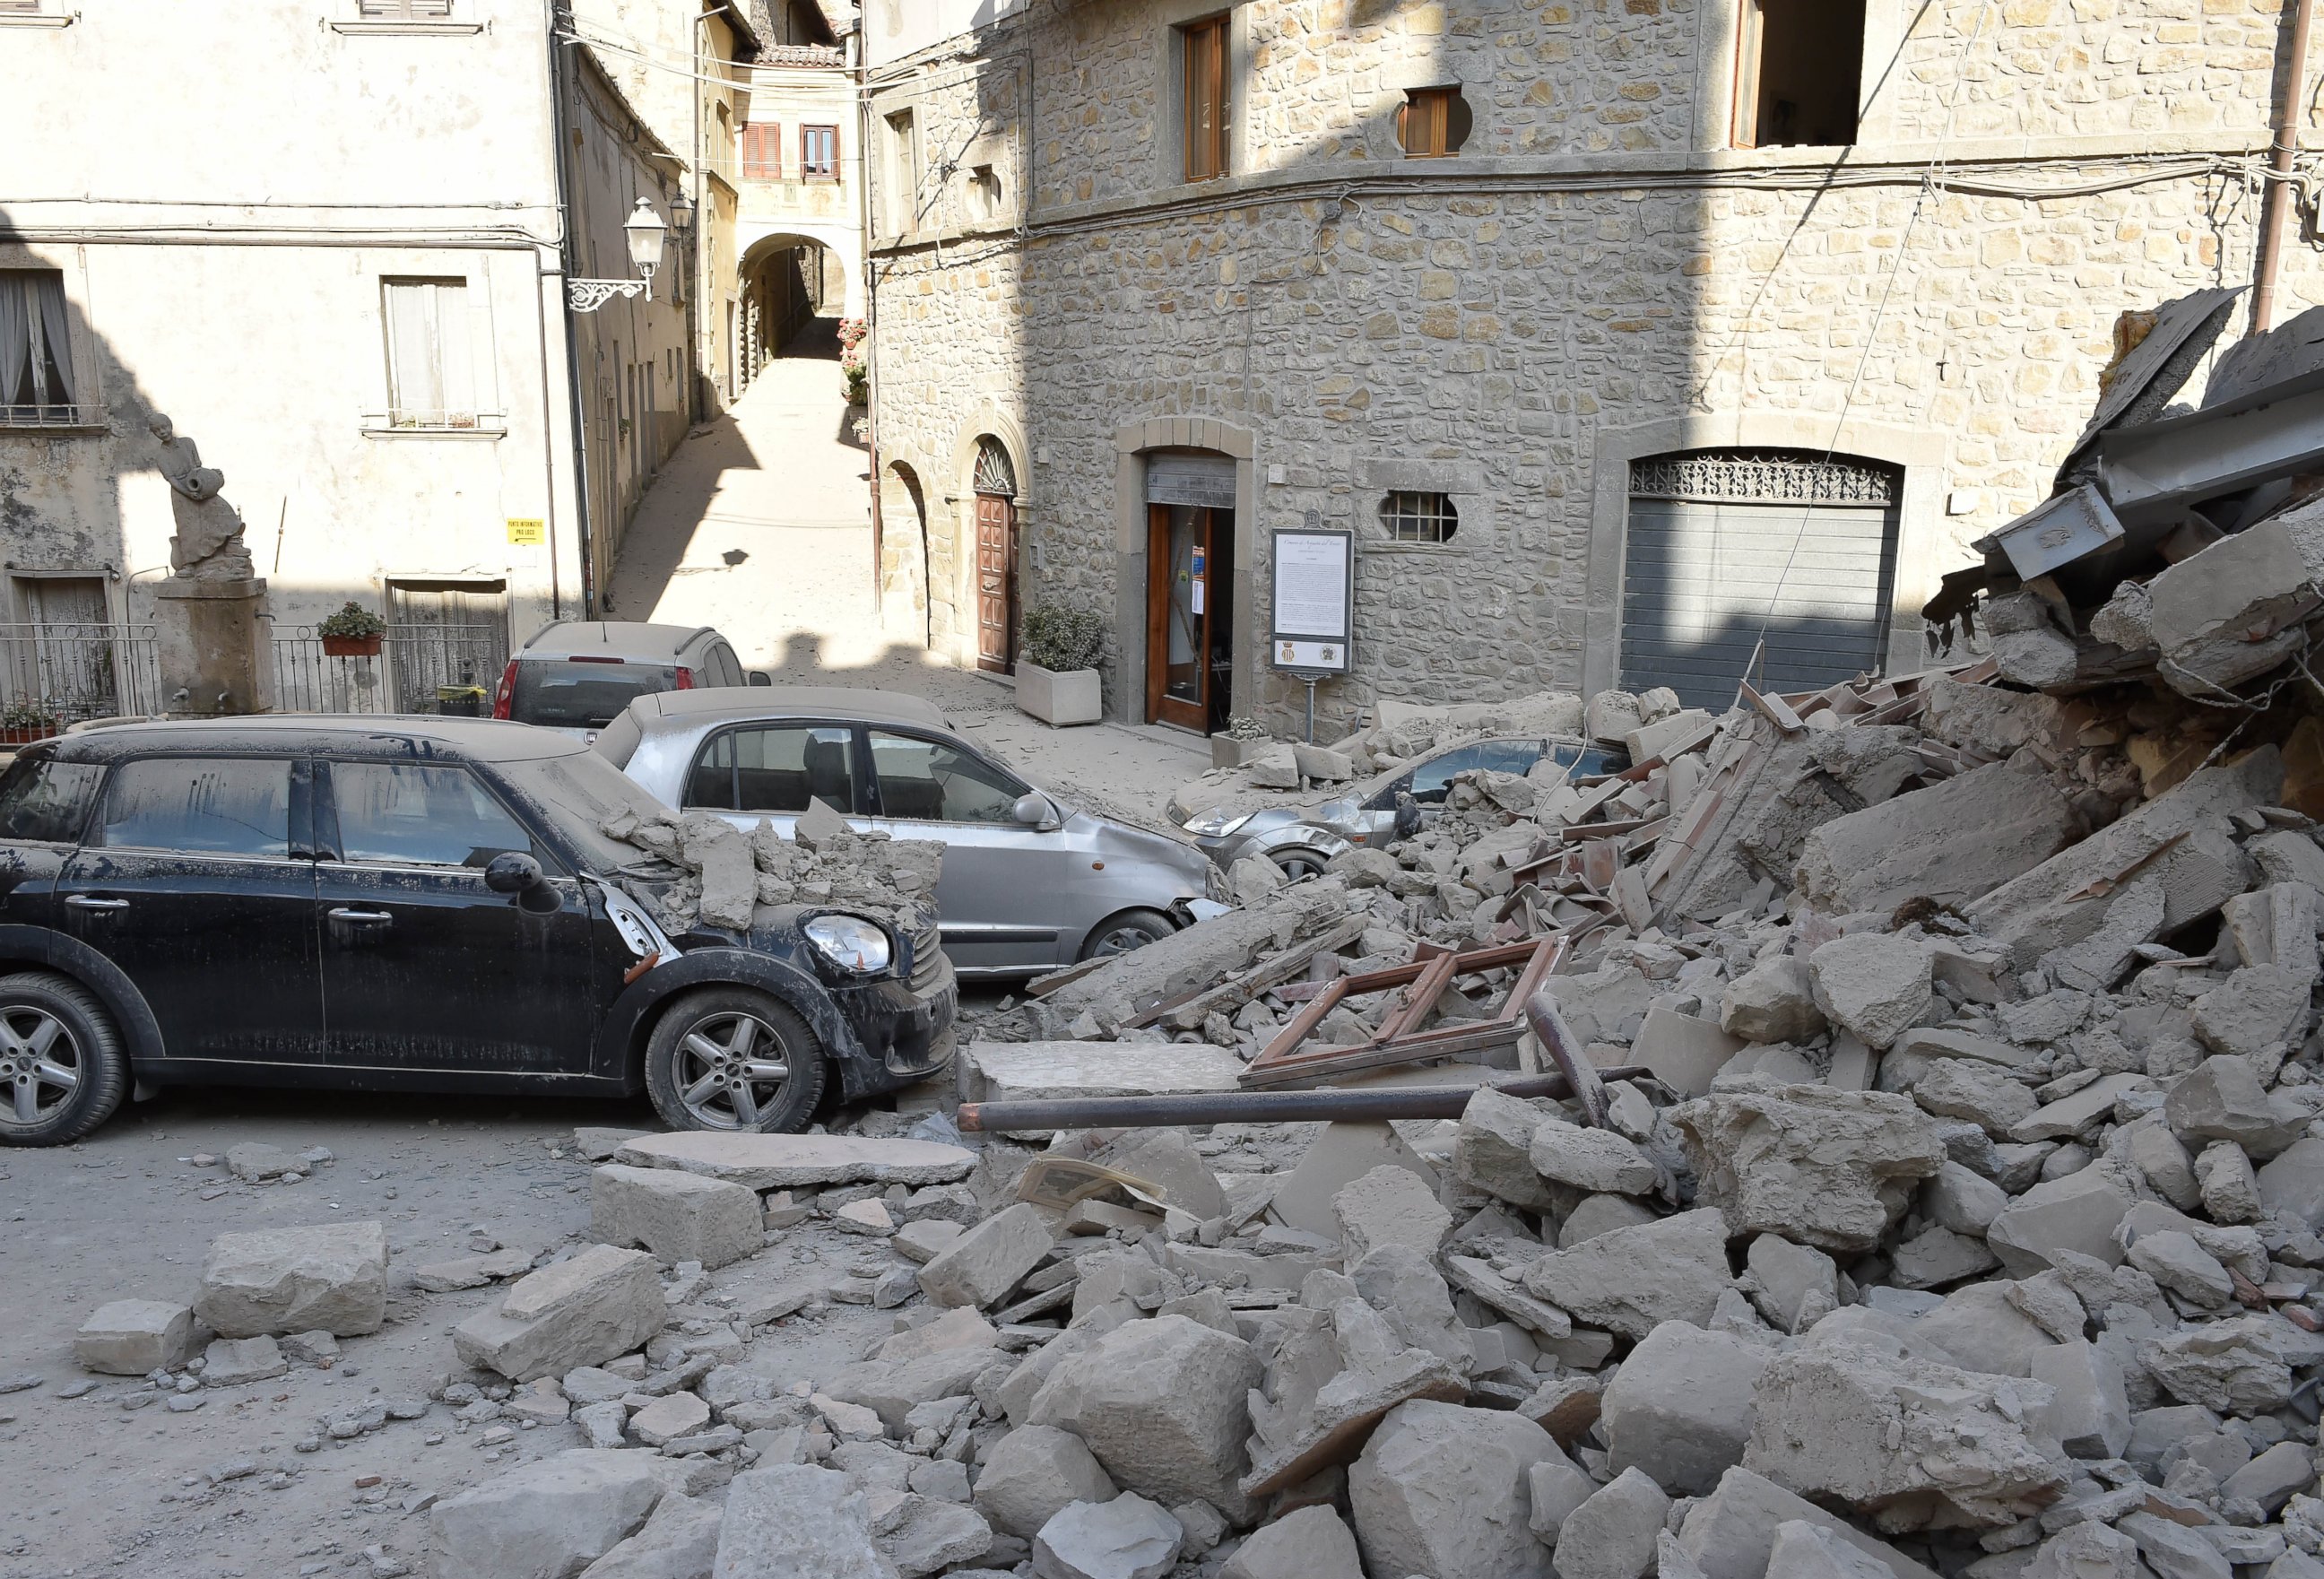 PHOTO: A view of buildings damaged by the earthquake, Aug. 24, 2016 in Arquata del Tronto, Italy.